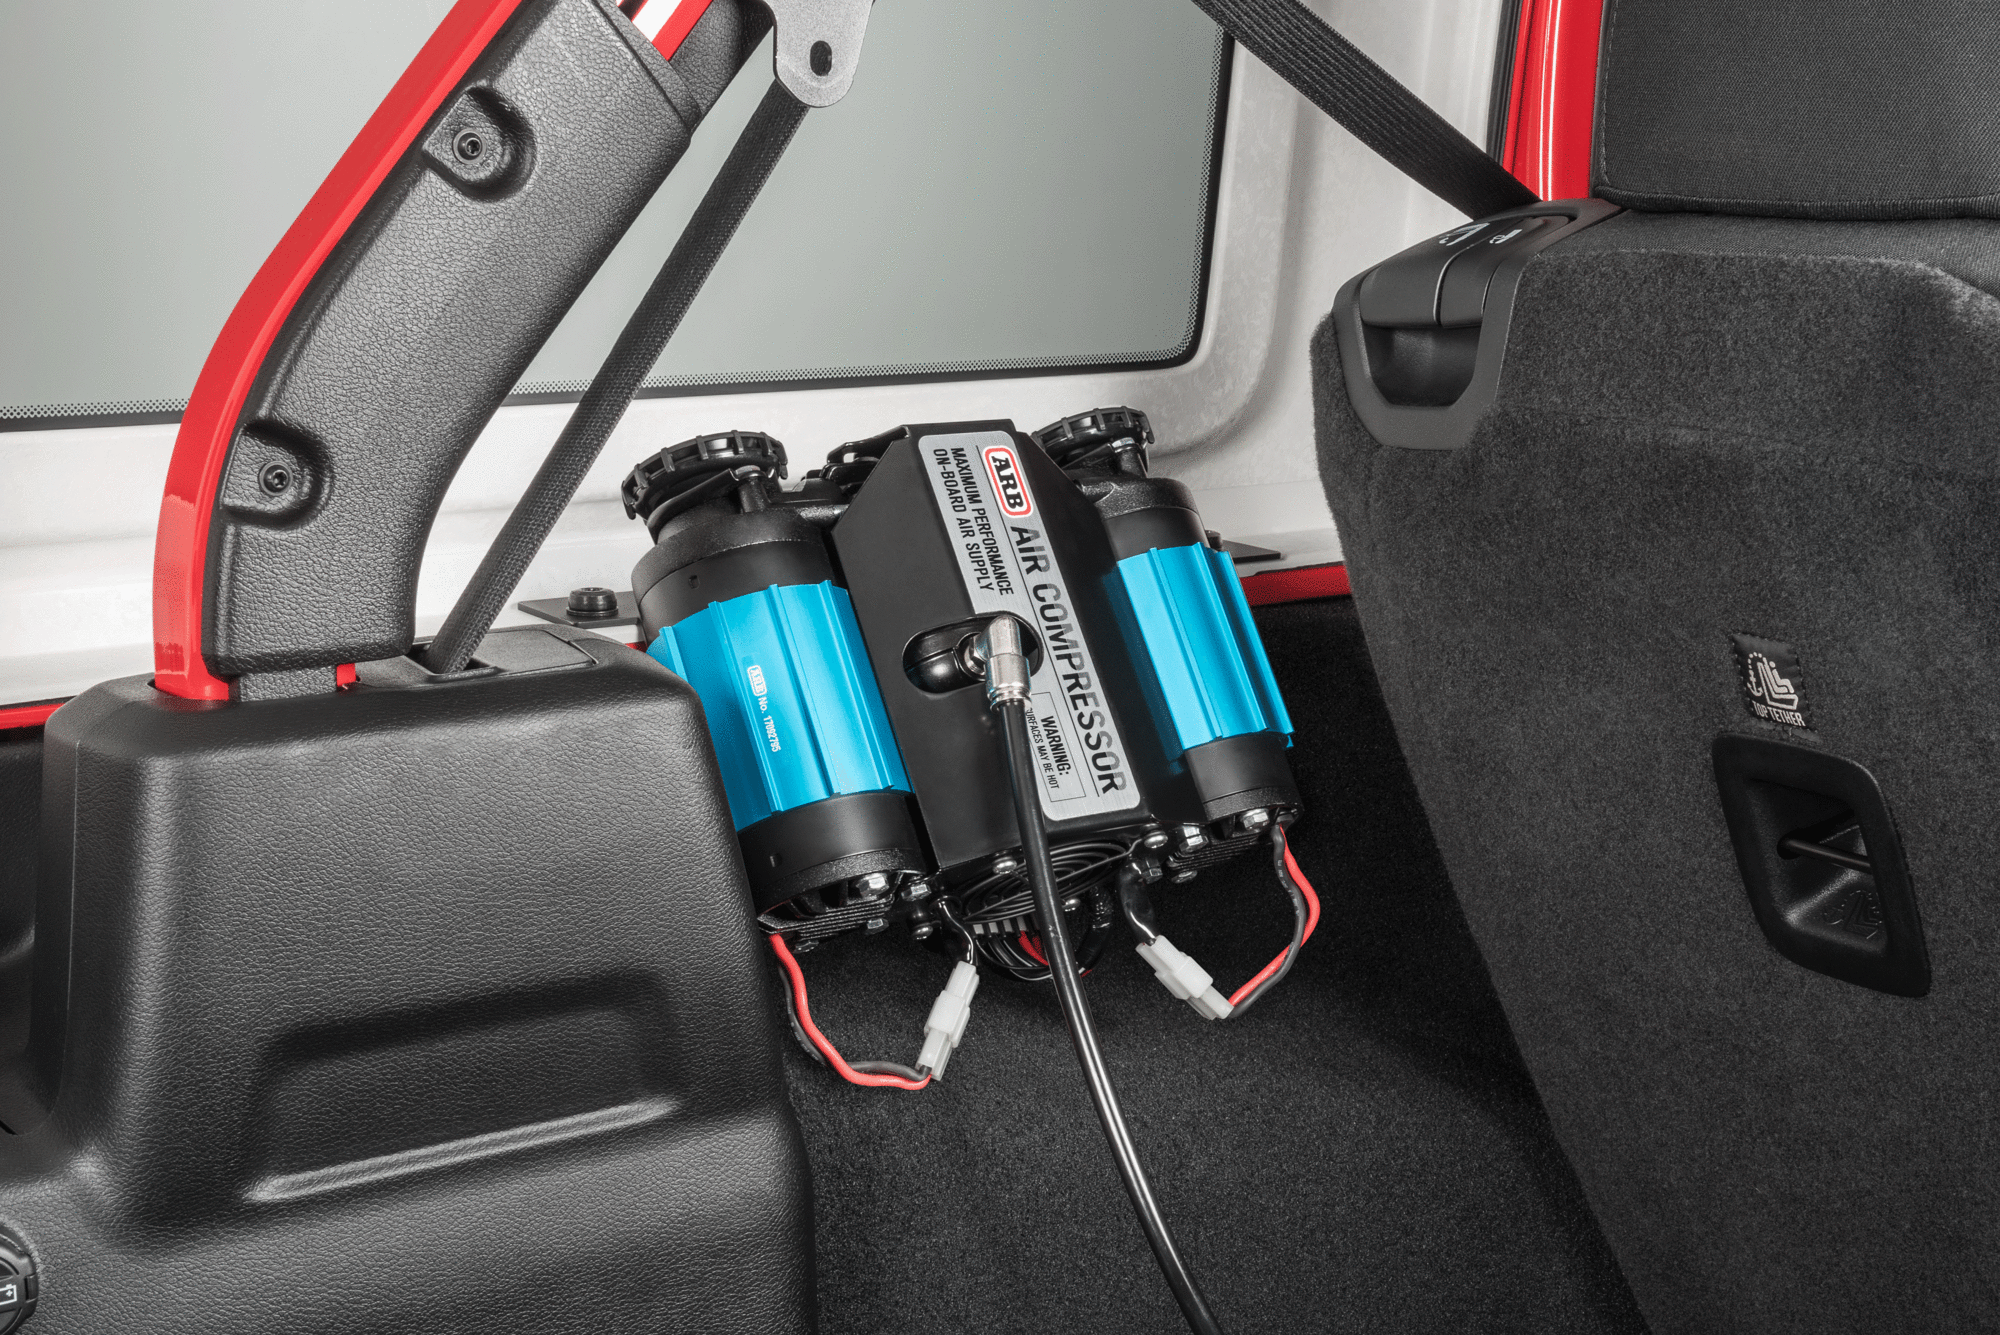 Up Down Air Air it Up Onboard Air Delivery System with ARB Twin Air  Compressor for 18-20 Jeep Wrangler JL | Quadratec